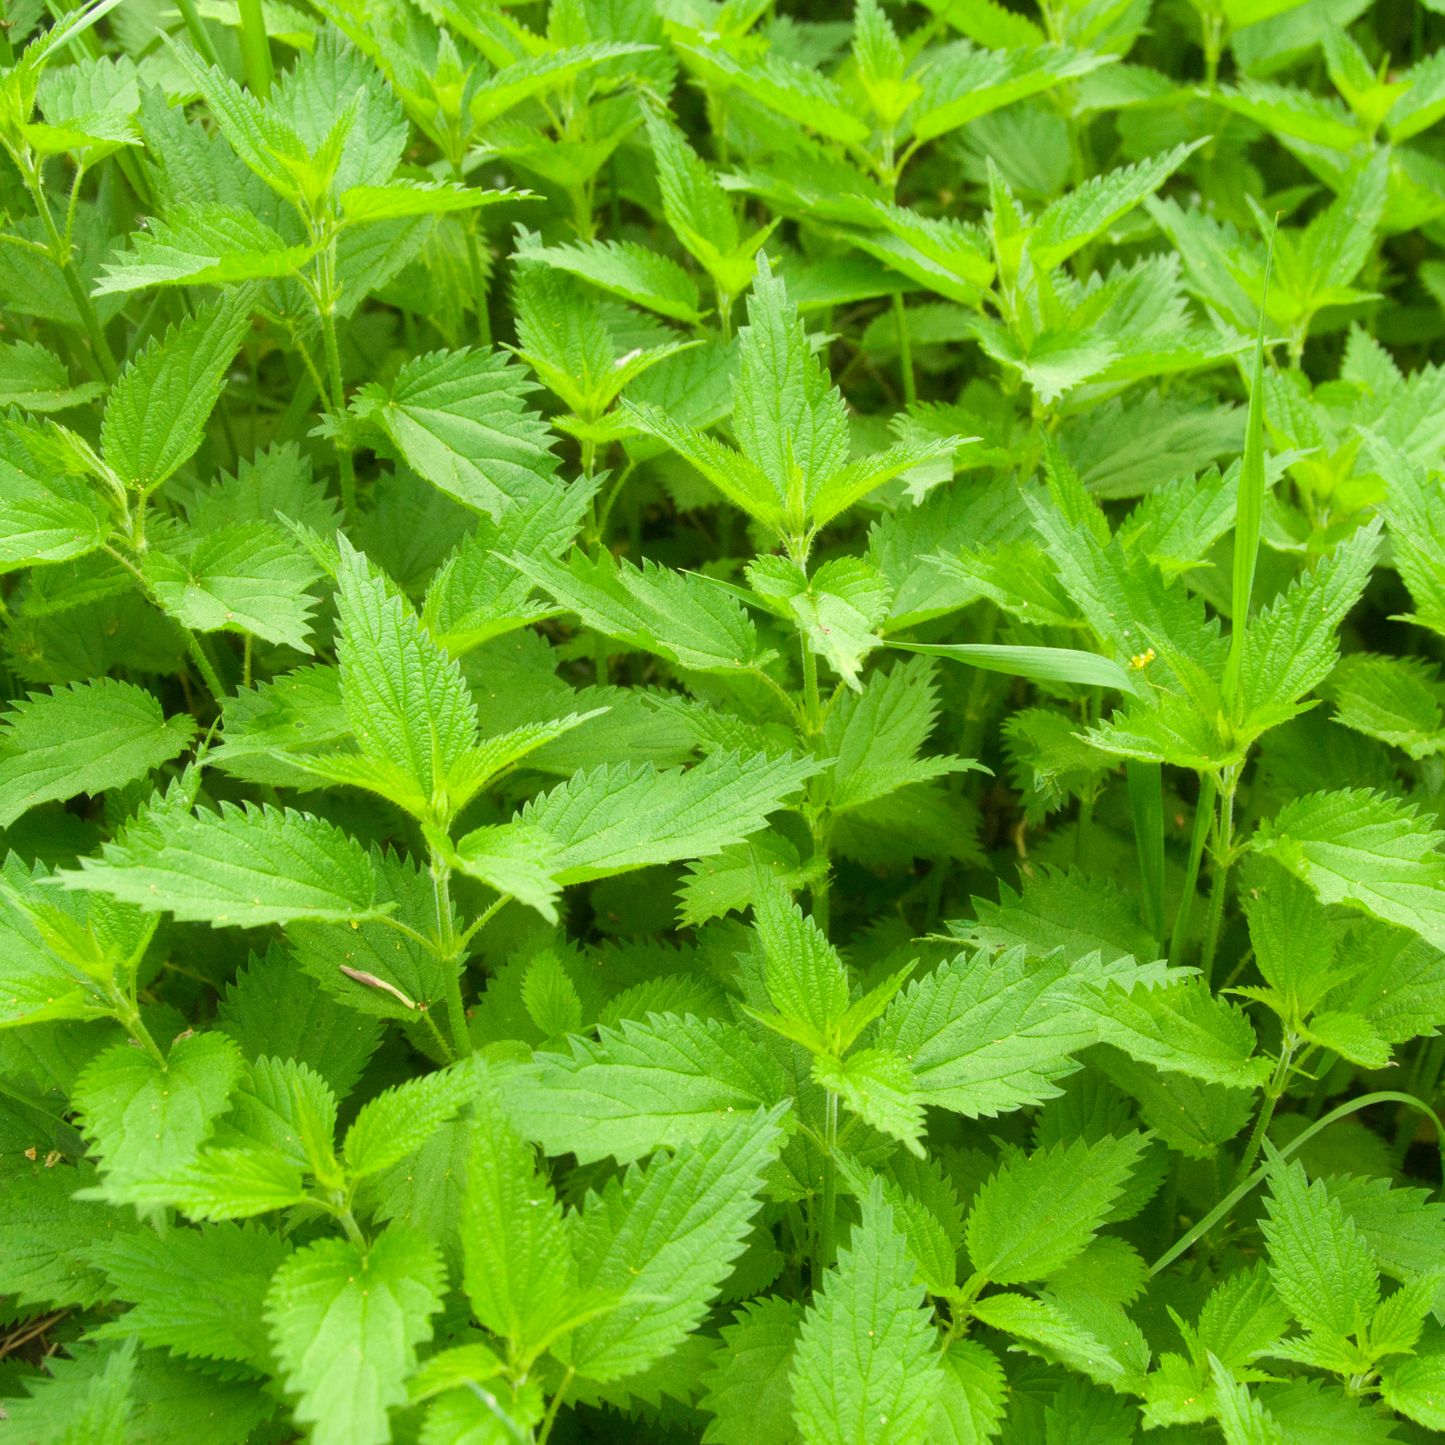 Stinging Nettle Leaf Herb For Protection from Harm, Ward Off Evil, Reverse Curses